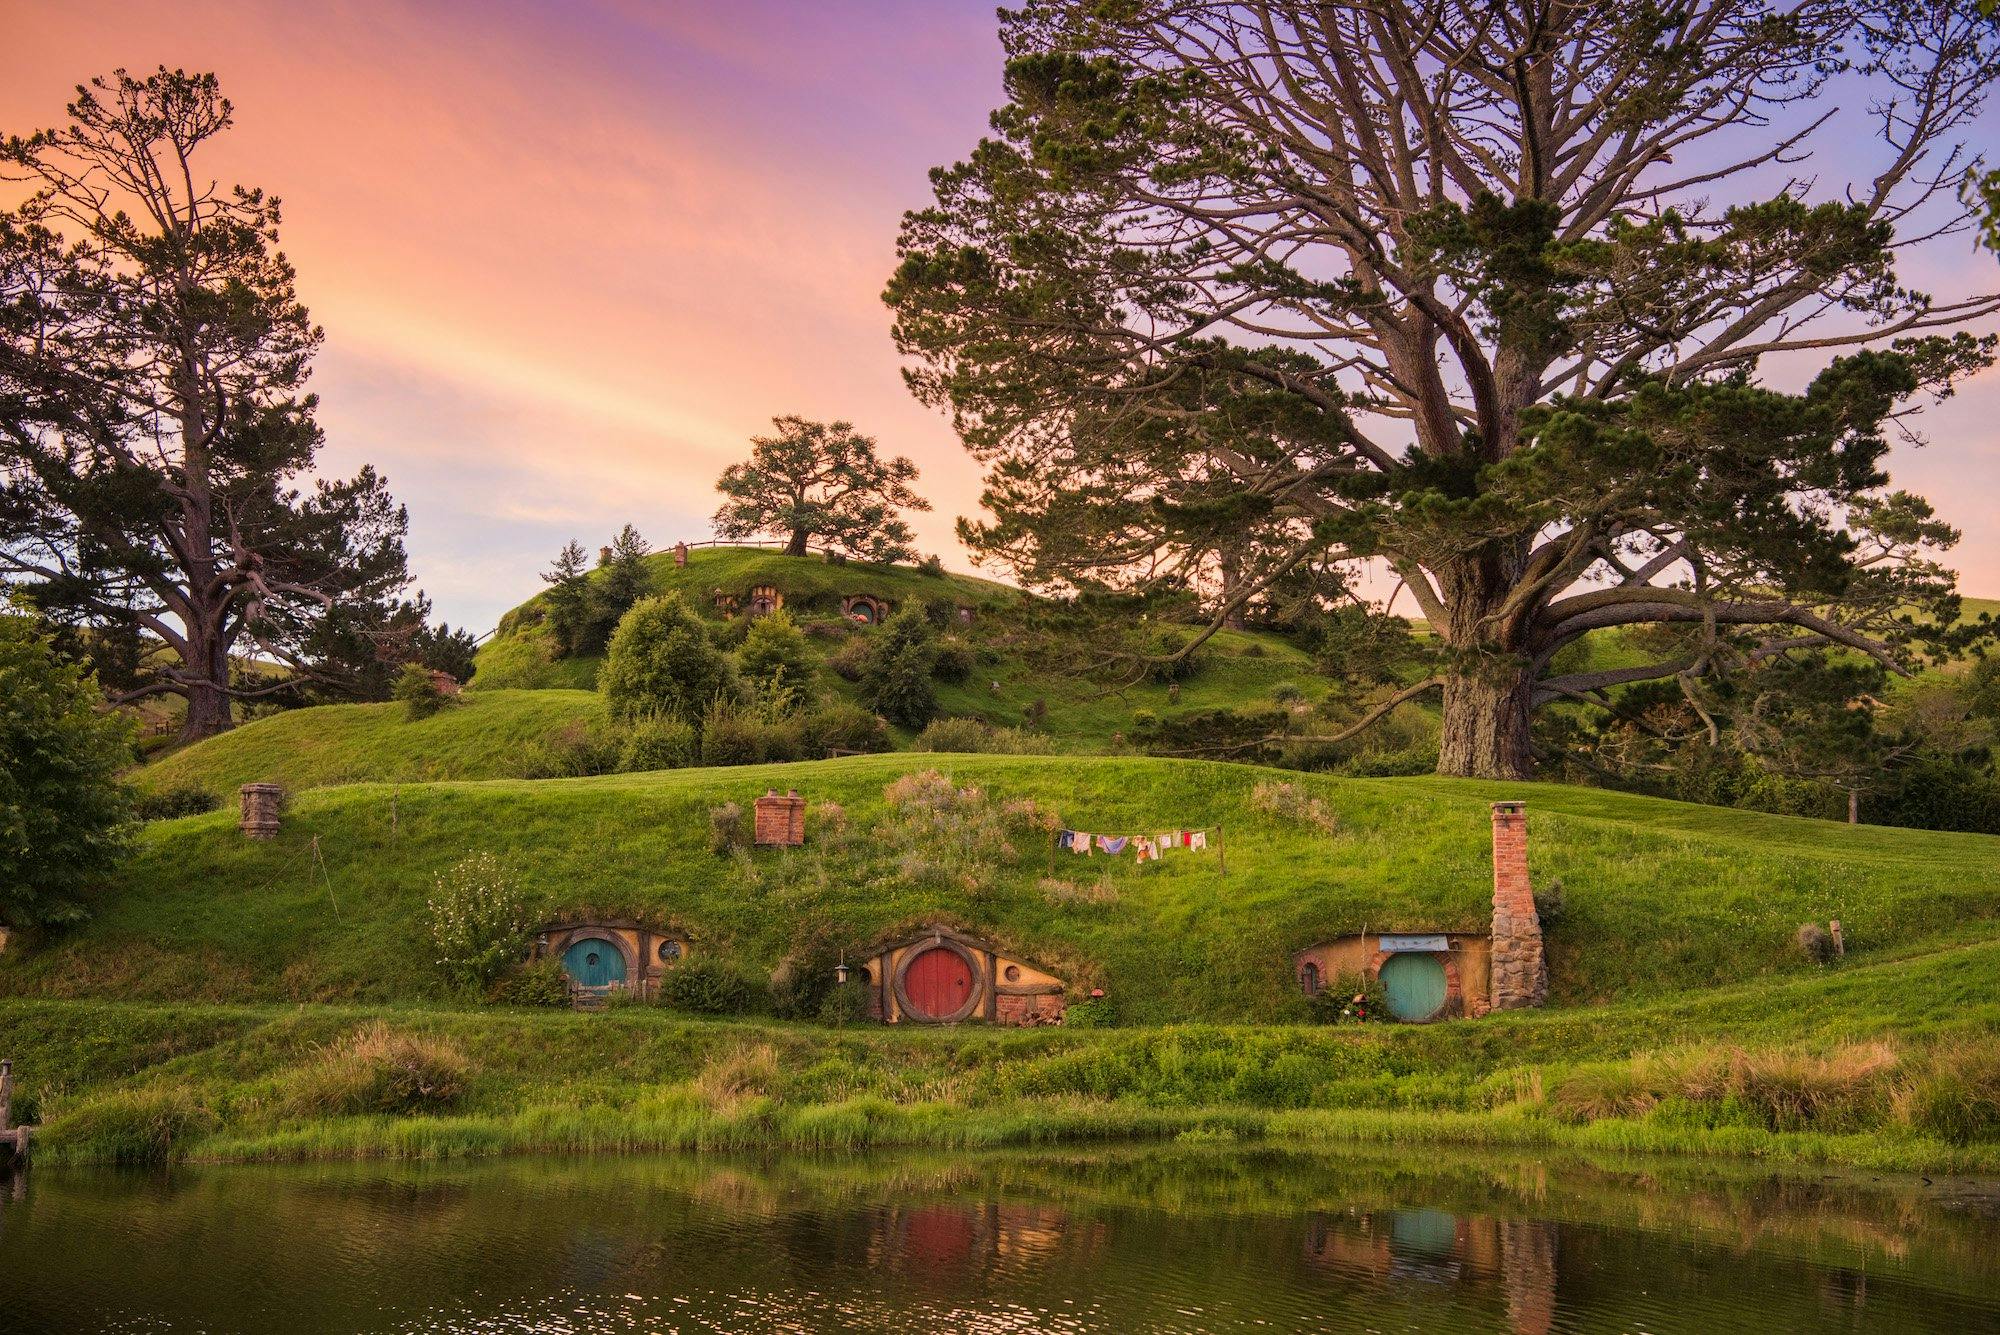 Middle earth experience - Hobbiton movie set and Te Puia geothermal valley